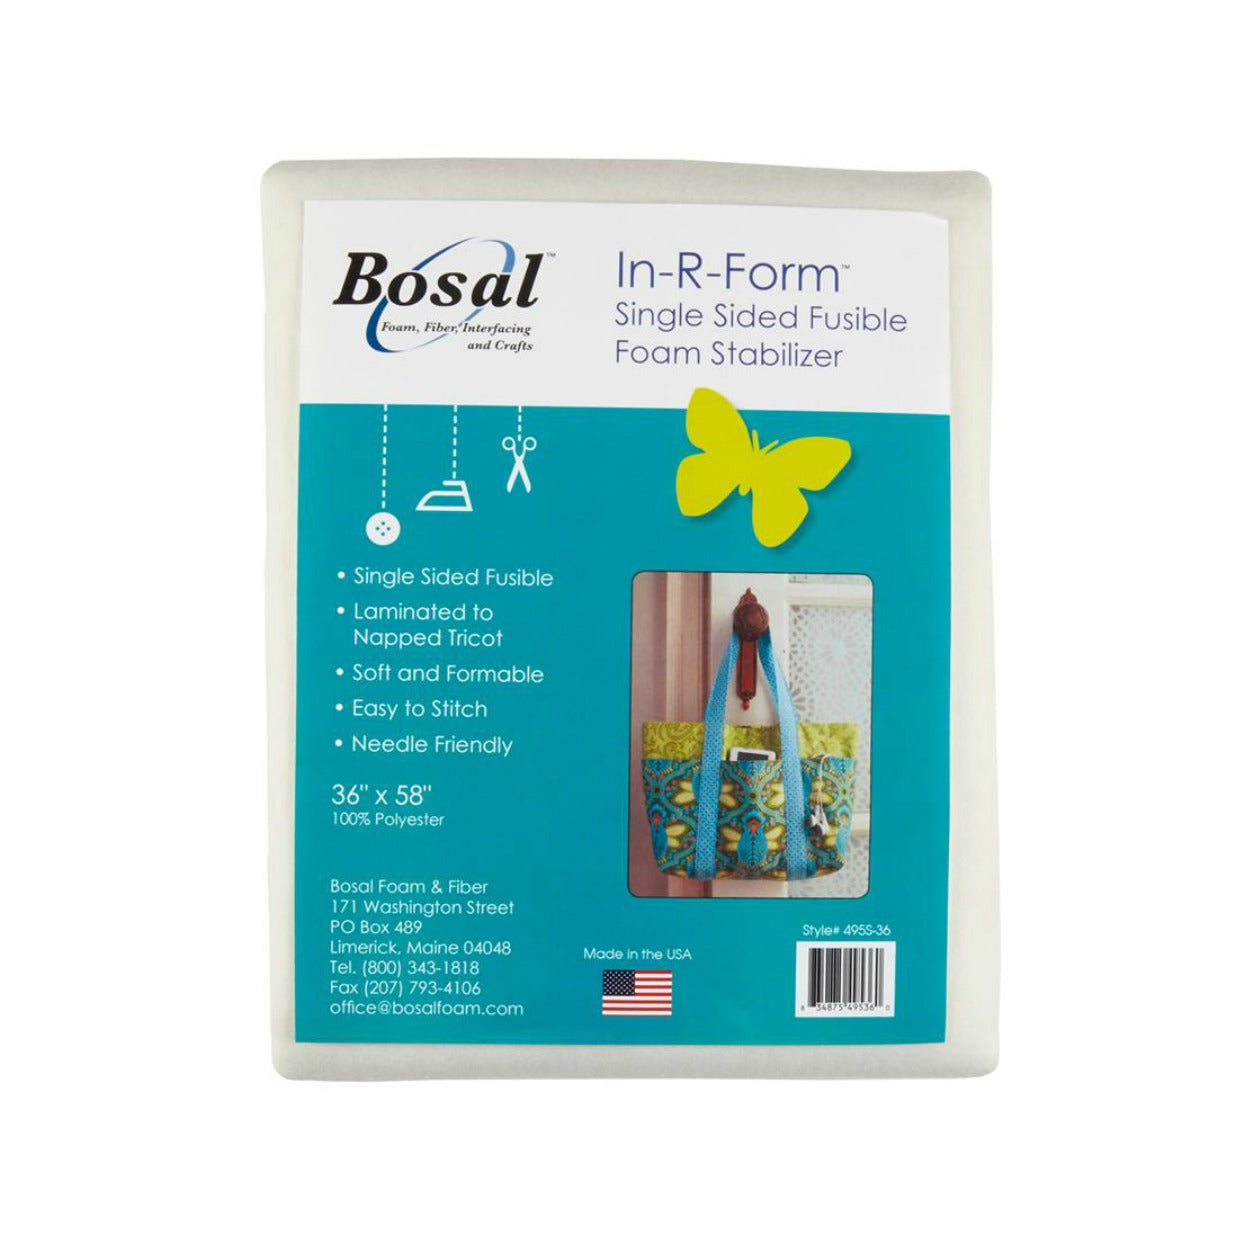 Bosal In-R-Form Single-Sided Fusible 36" by 58" White